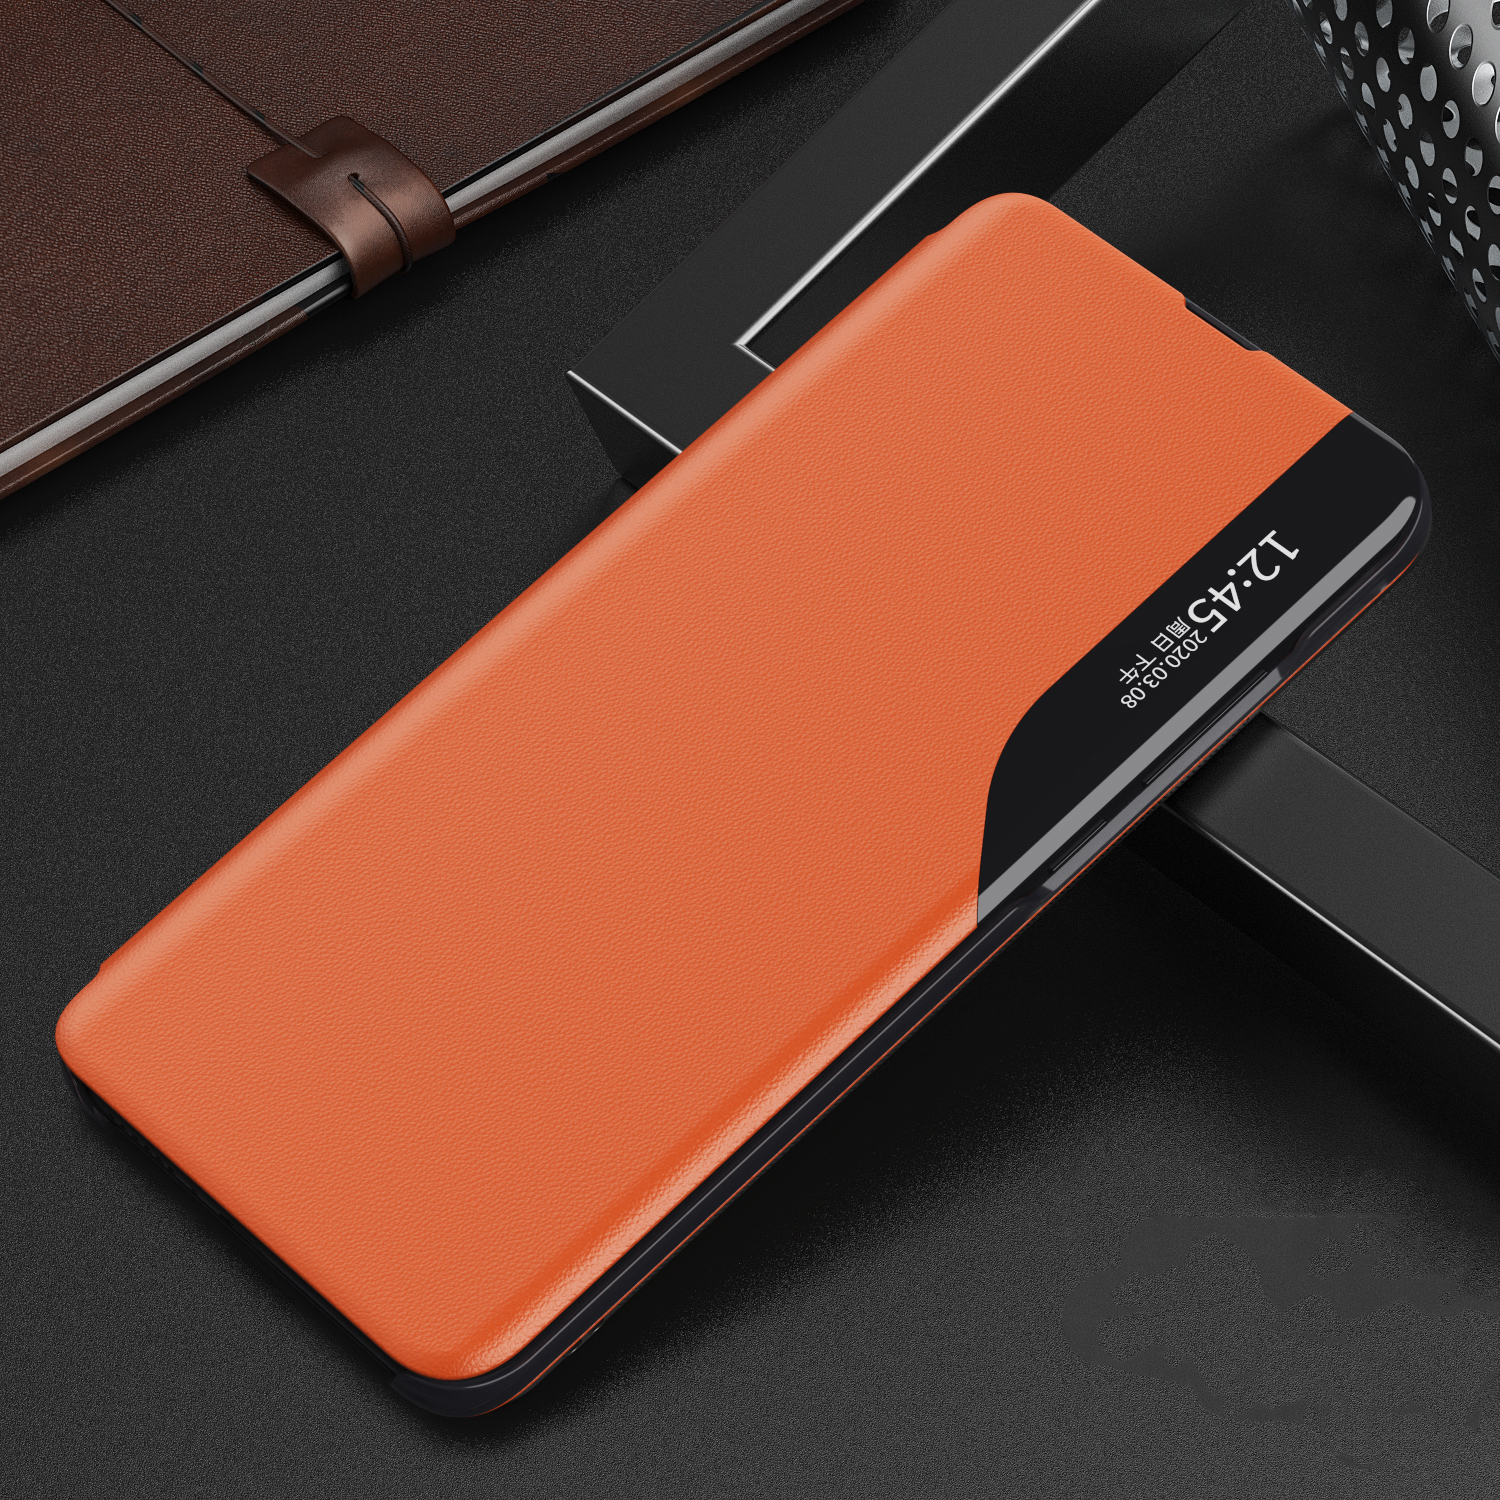 Bakeey-for-Xiaomi-Redmi-Note-8-Case-Magnetic-Flip-Smart-Sleep-Window-View-Shockproof-PU-Leather-Full-1748966-12